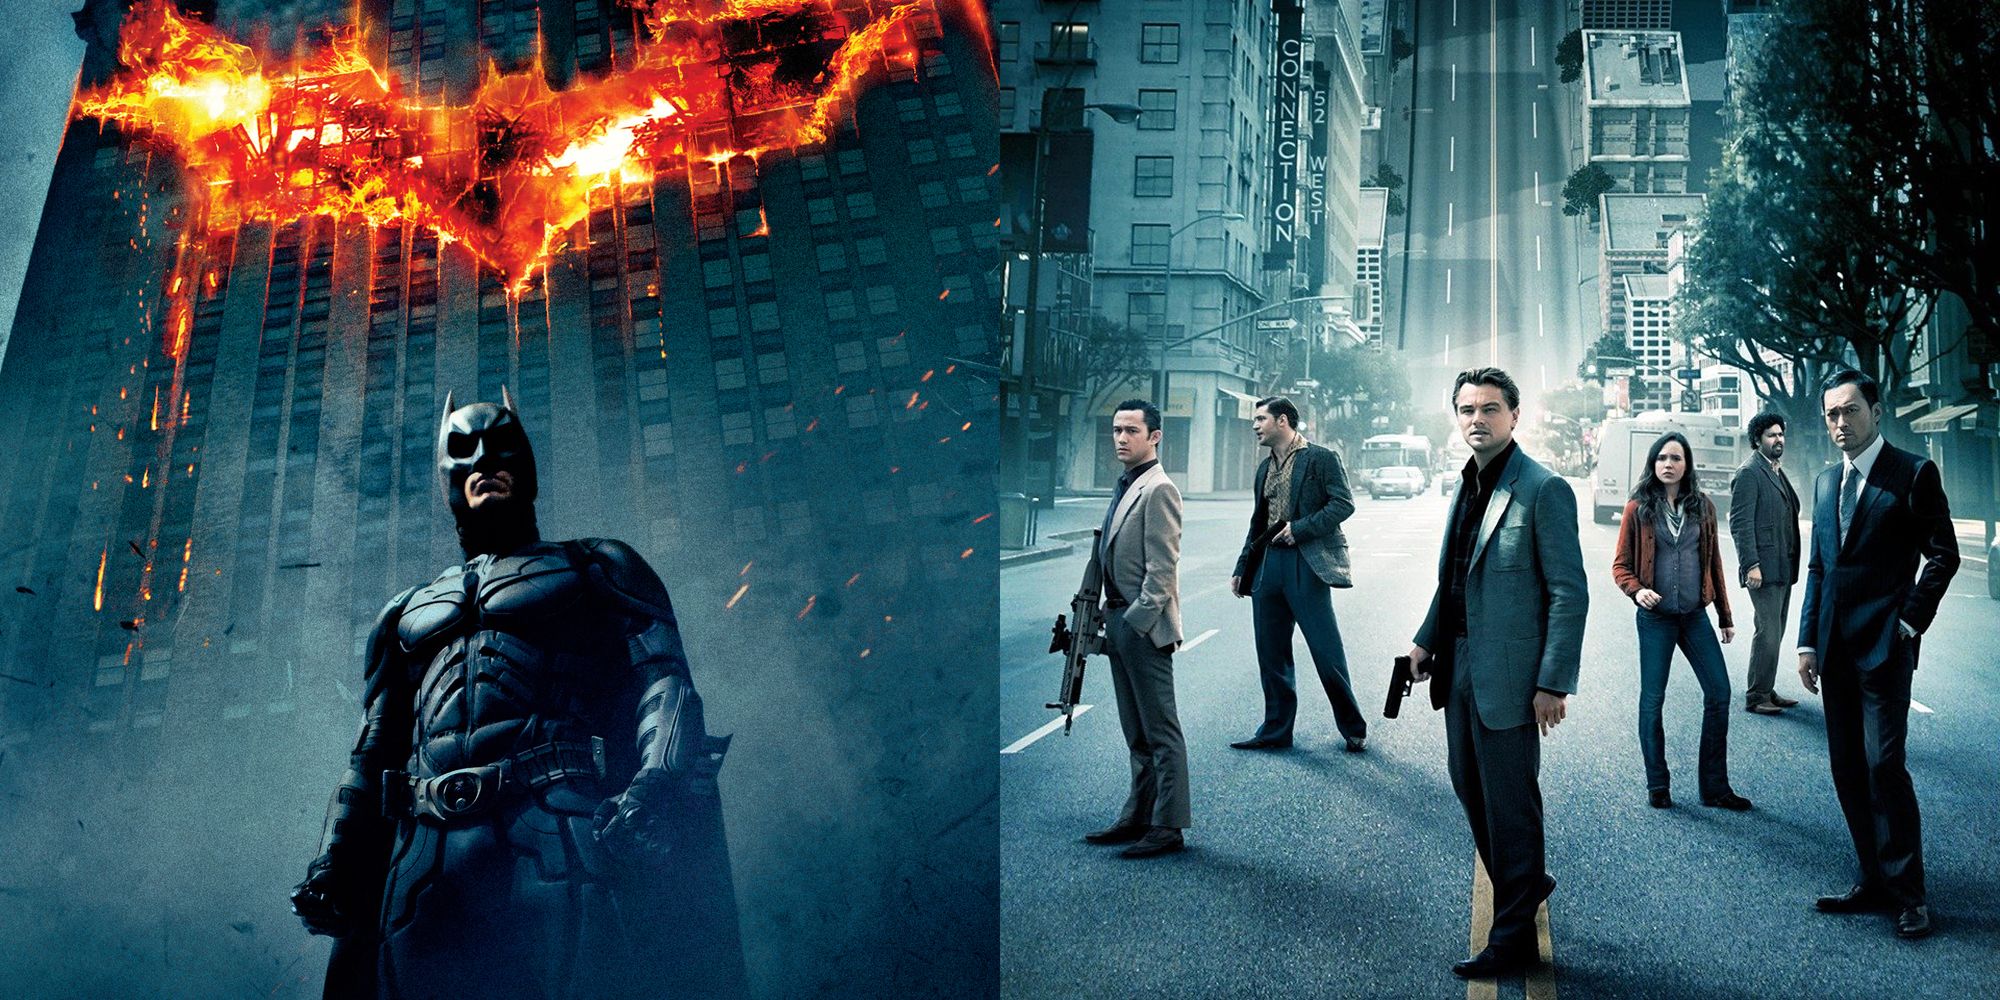 The Dark Knight and Inception